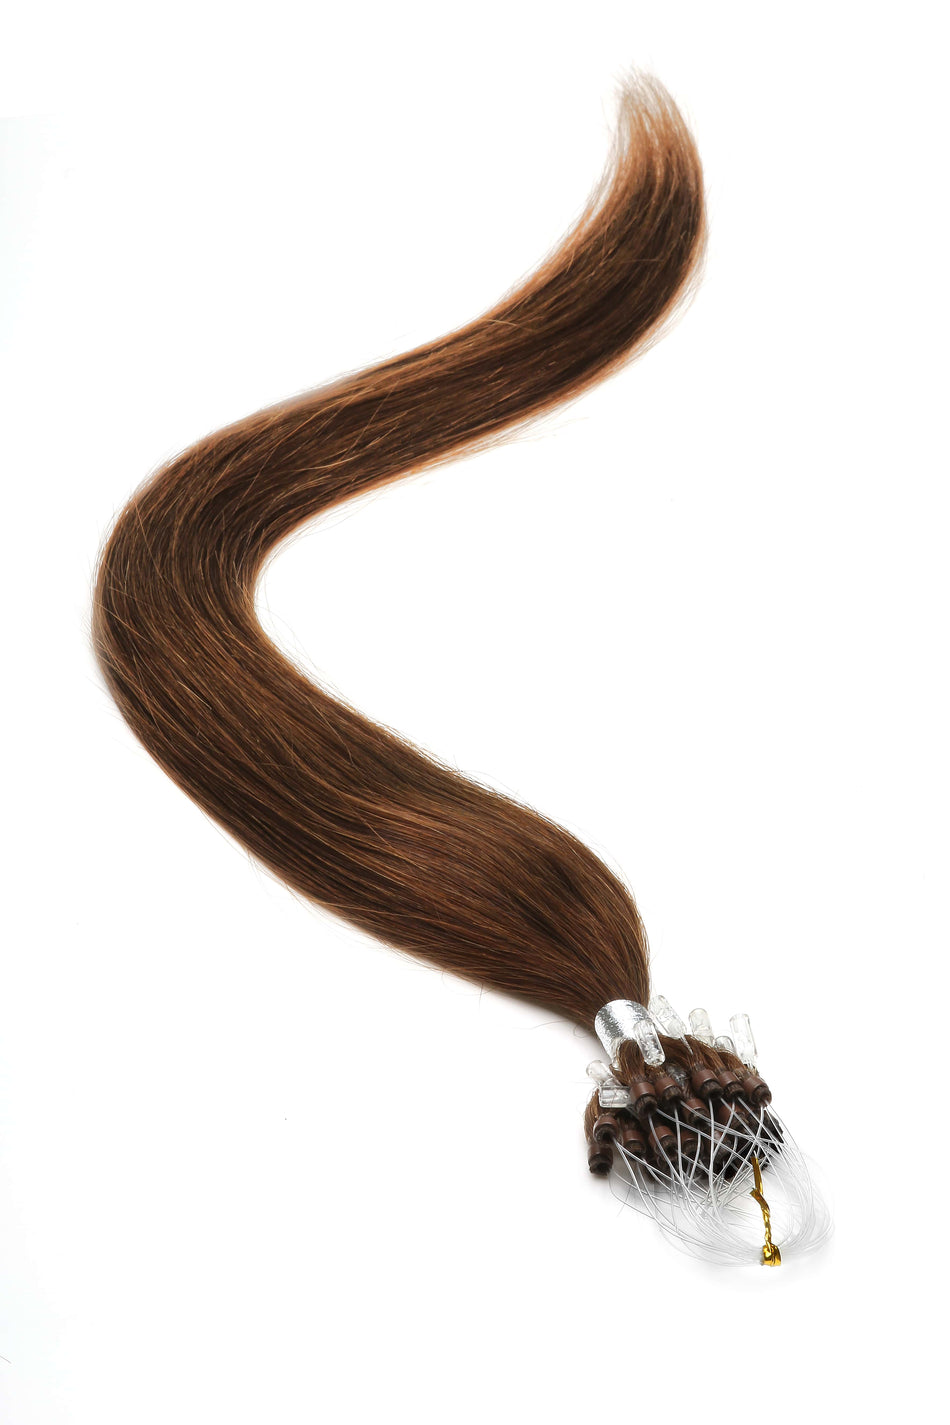 a piece of brown hair is laying on a white surface